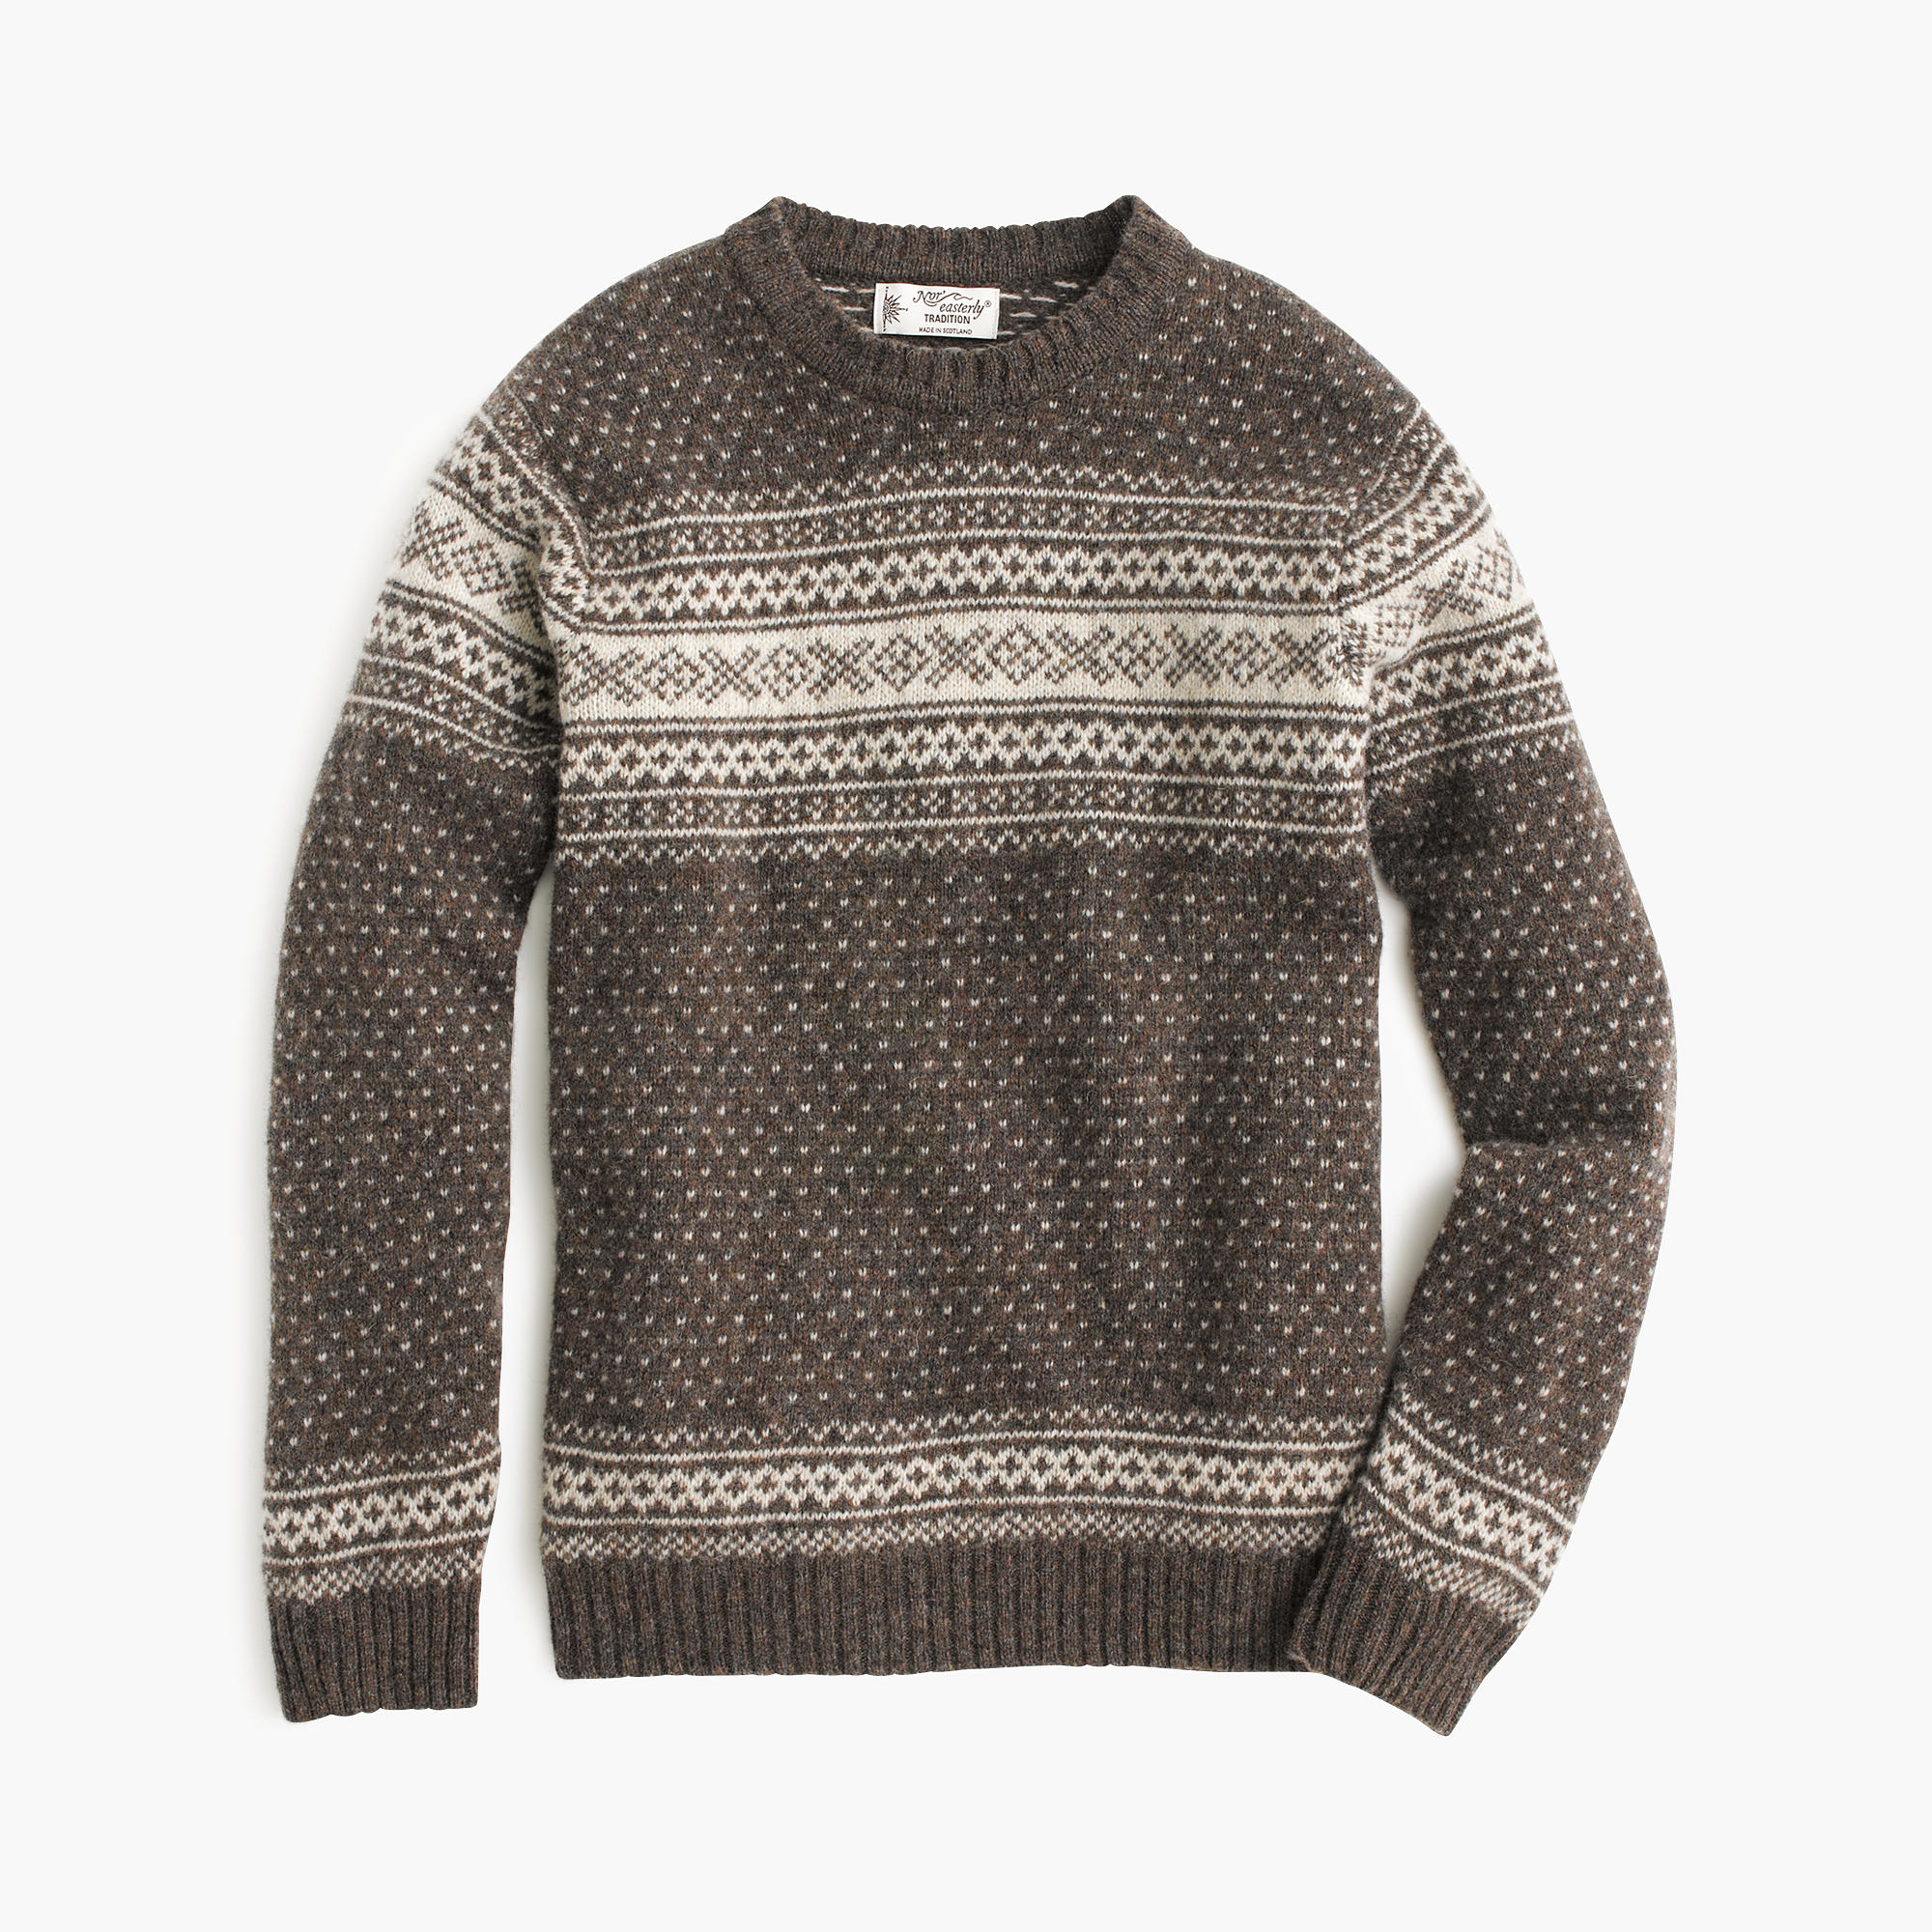 Lyst - J.Crew Harley Of Scotland Nor'easterly Sweater in Gray for Men